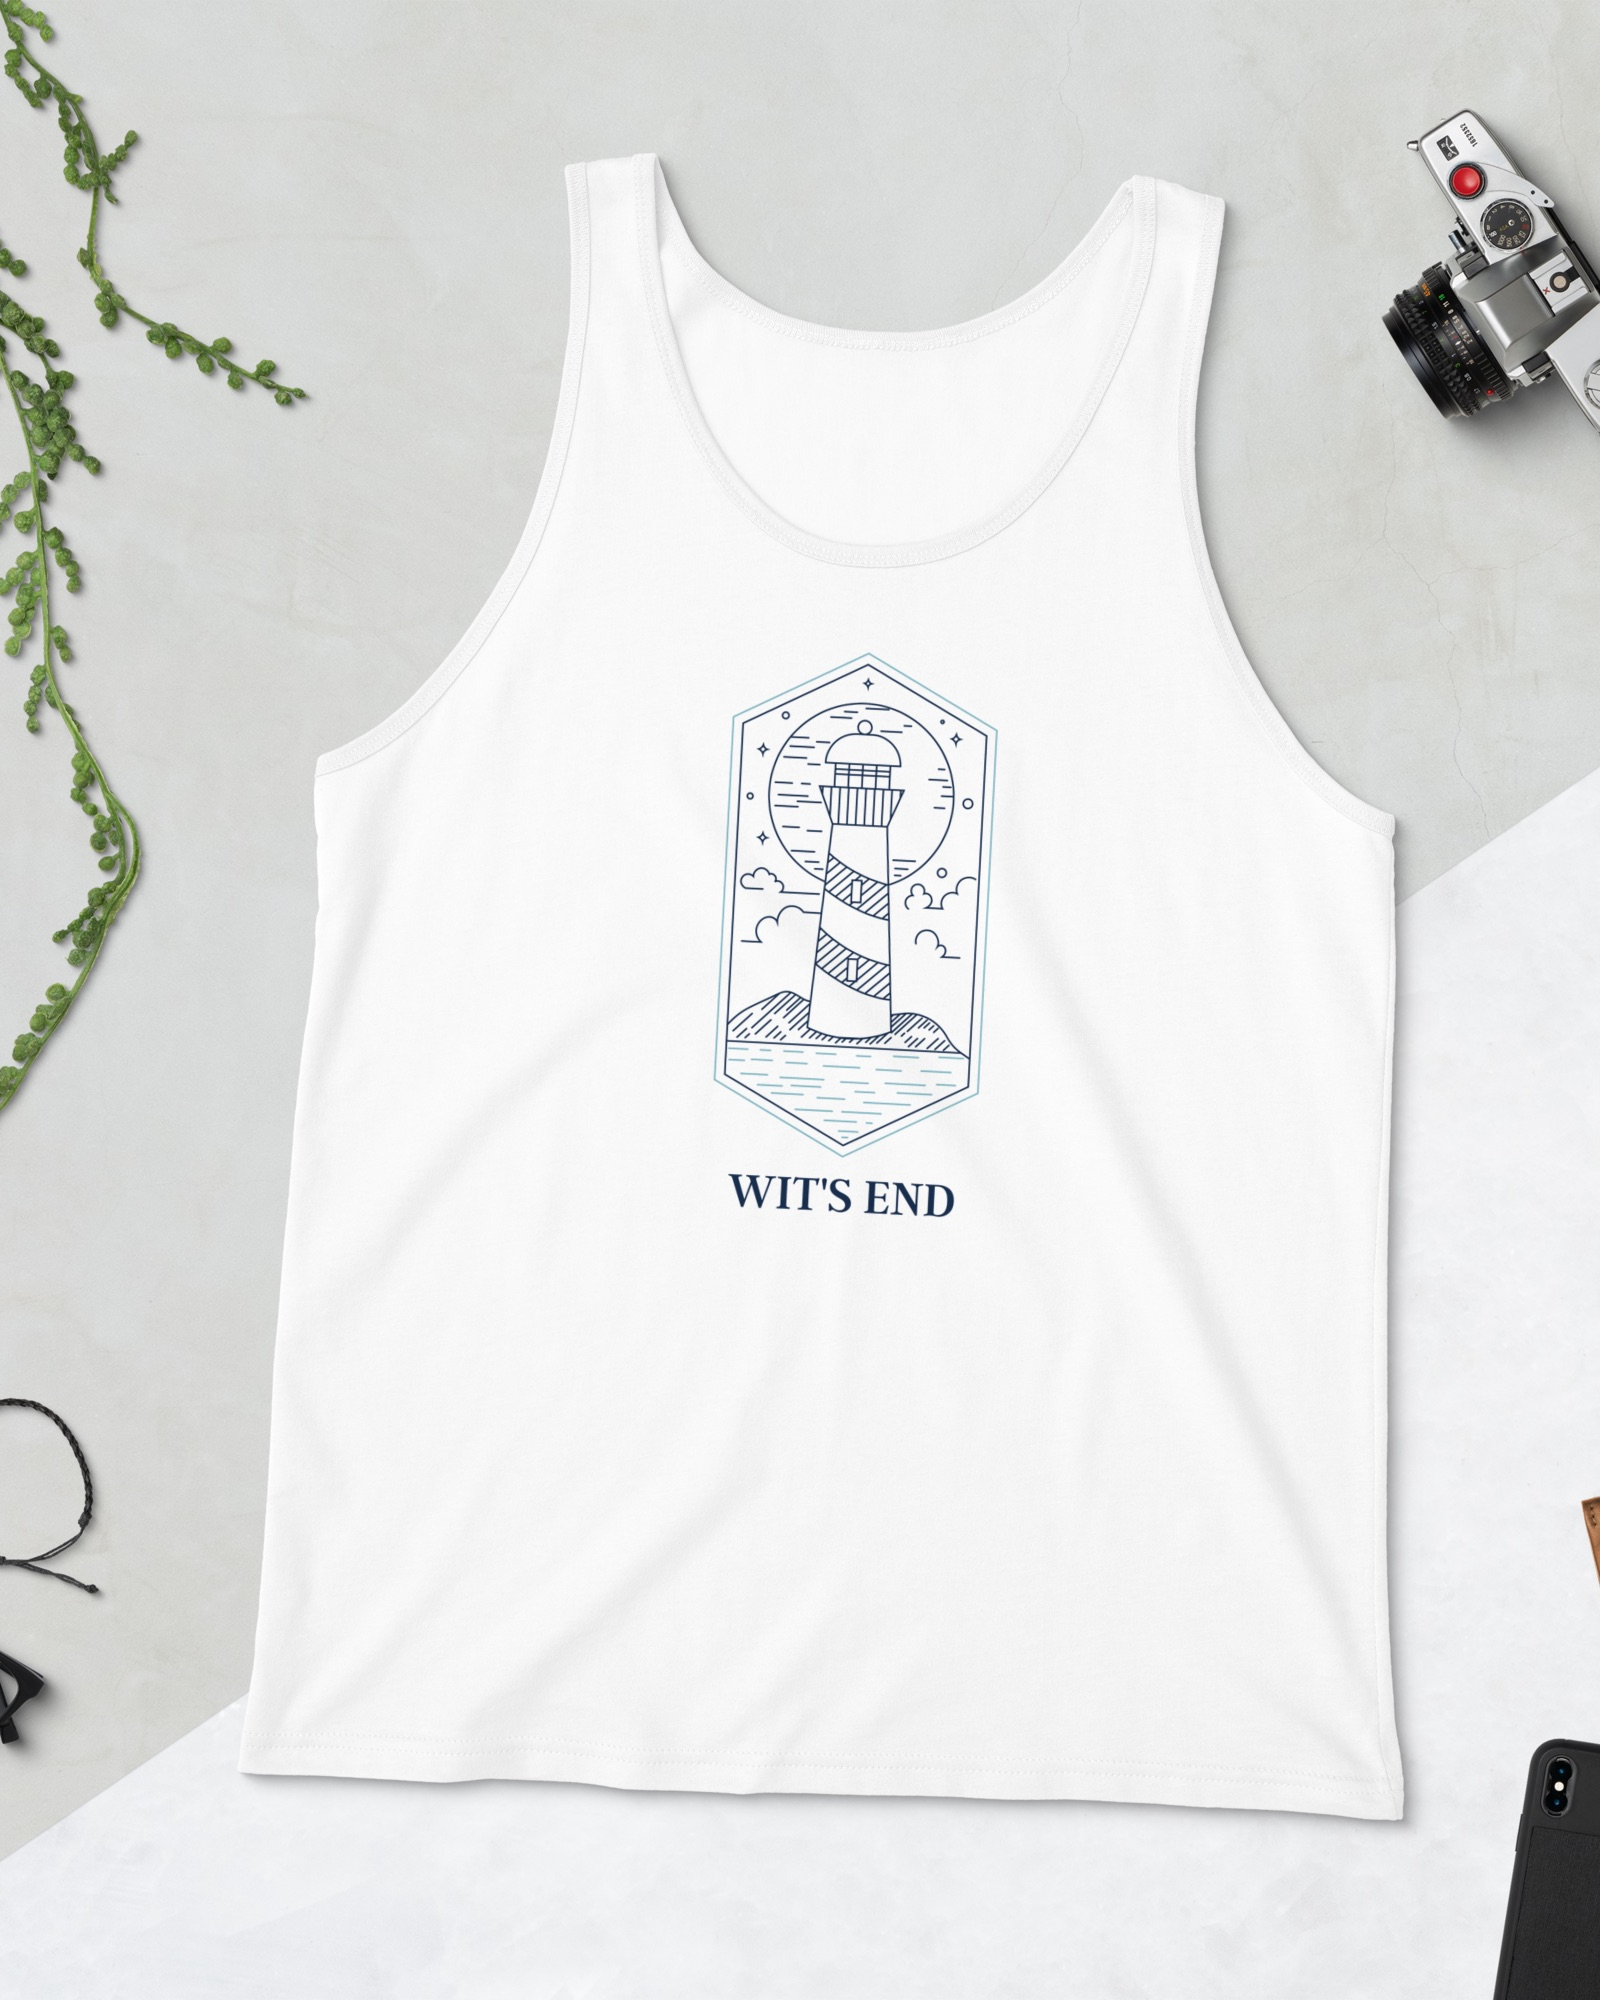 These official Wit's End gift shop items help one to sustain and keep one's wits—and connect with others who've been to Wit's End